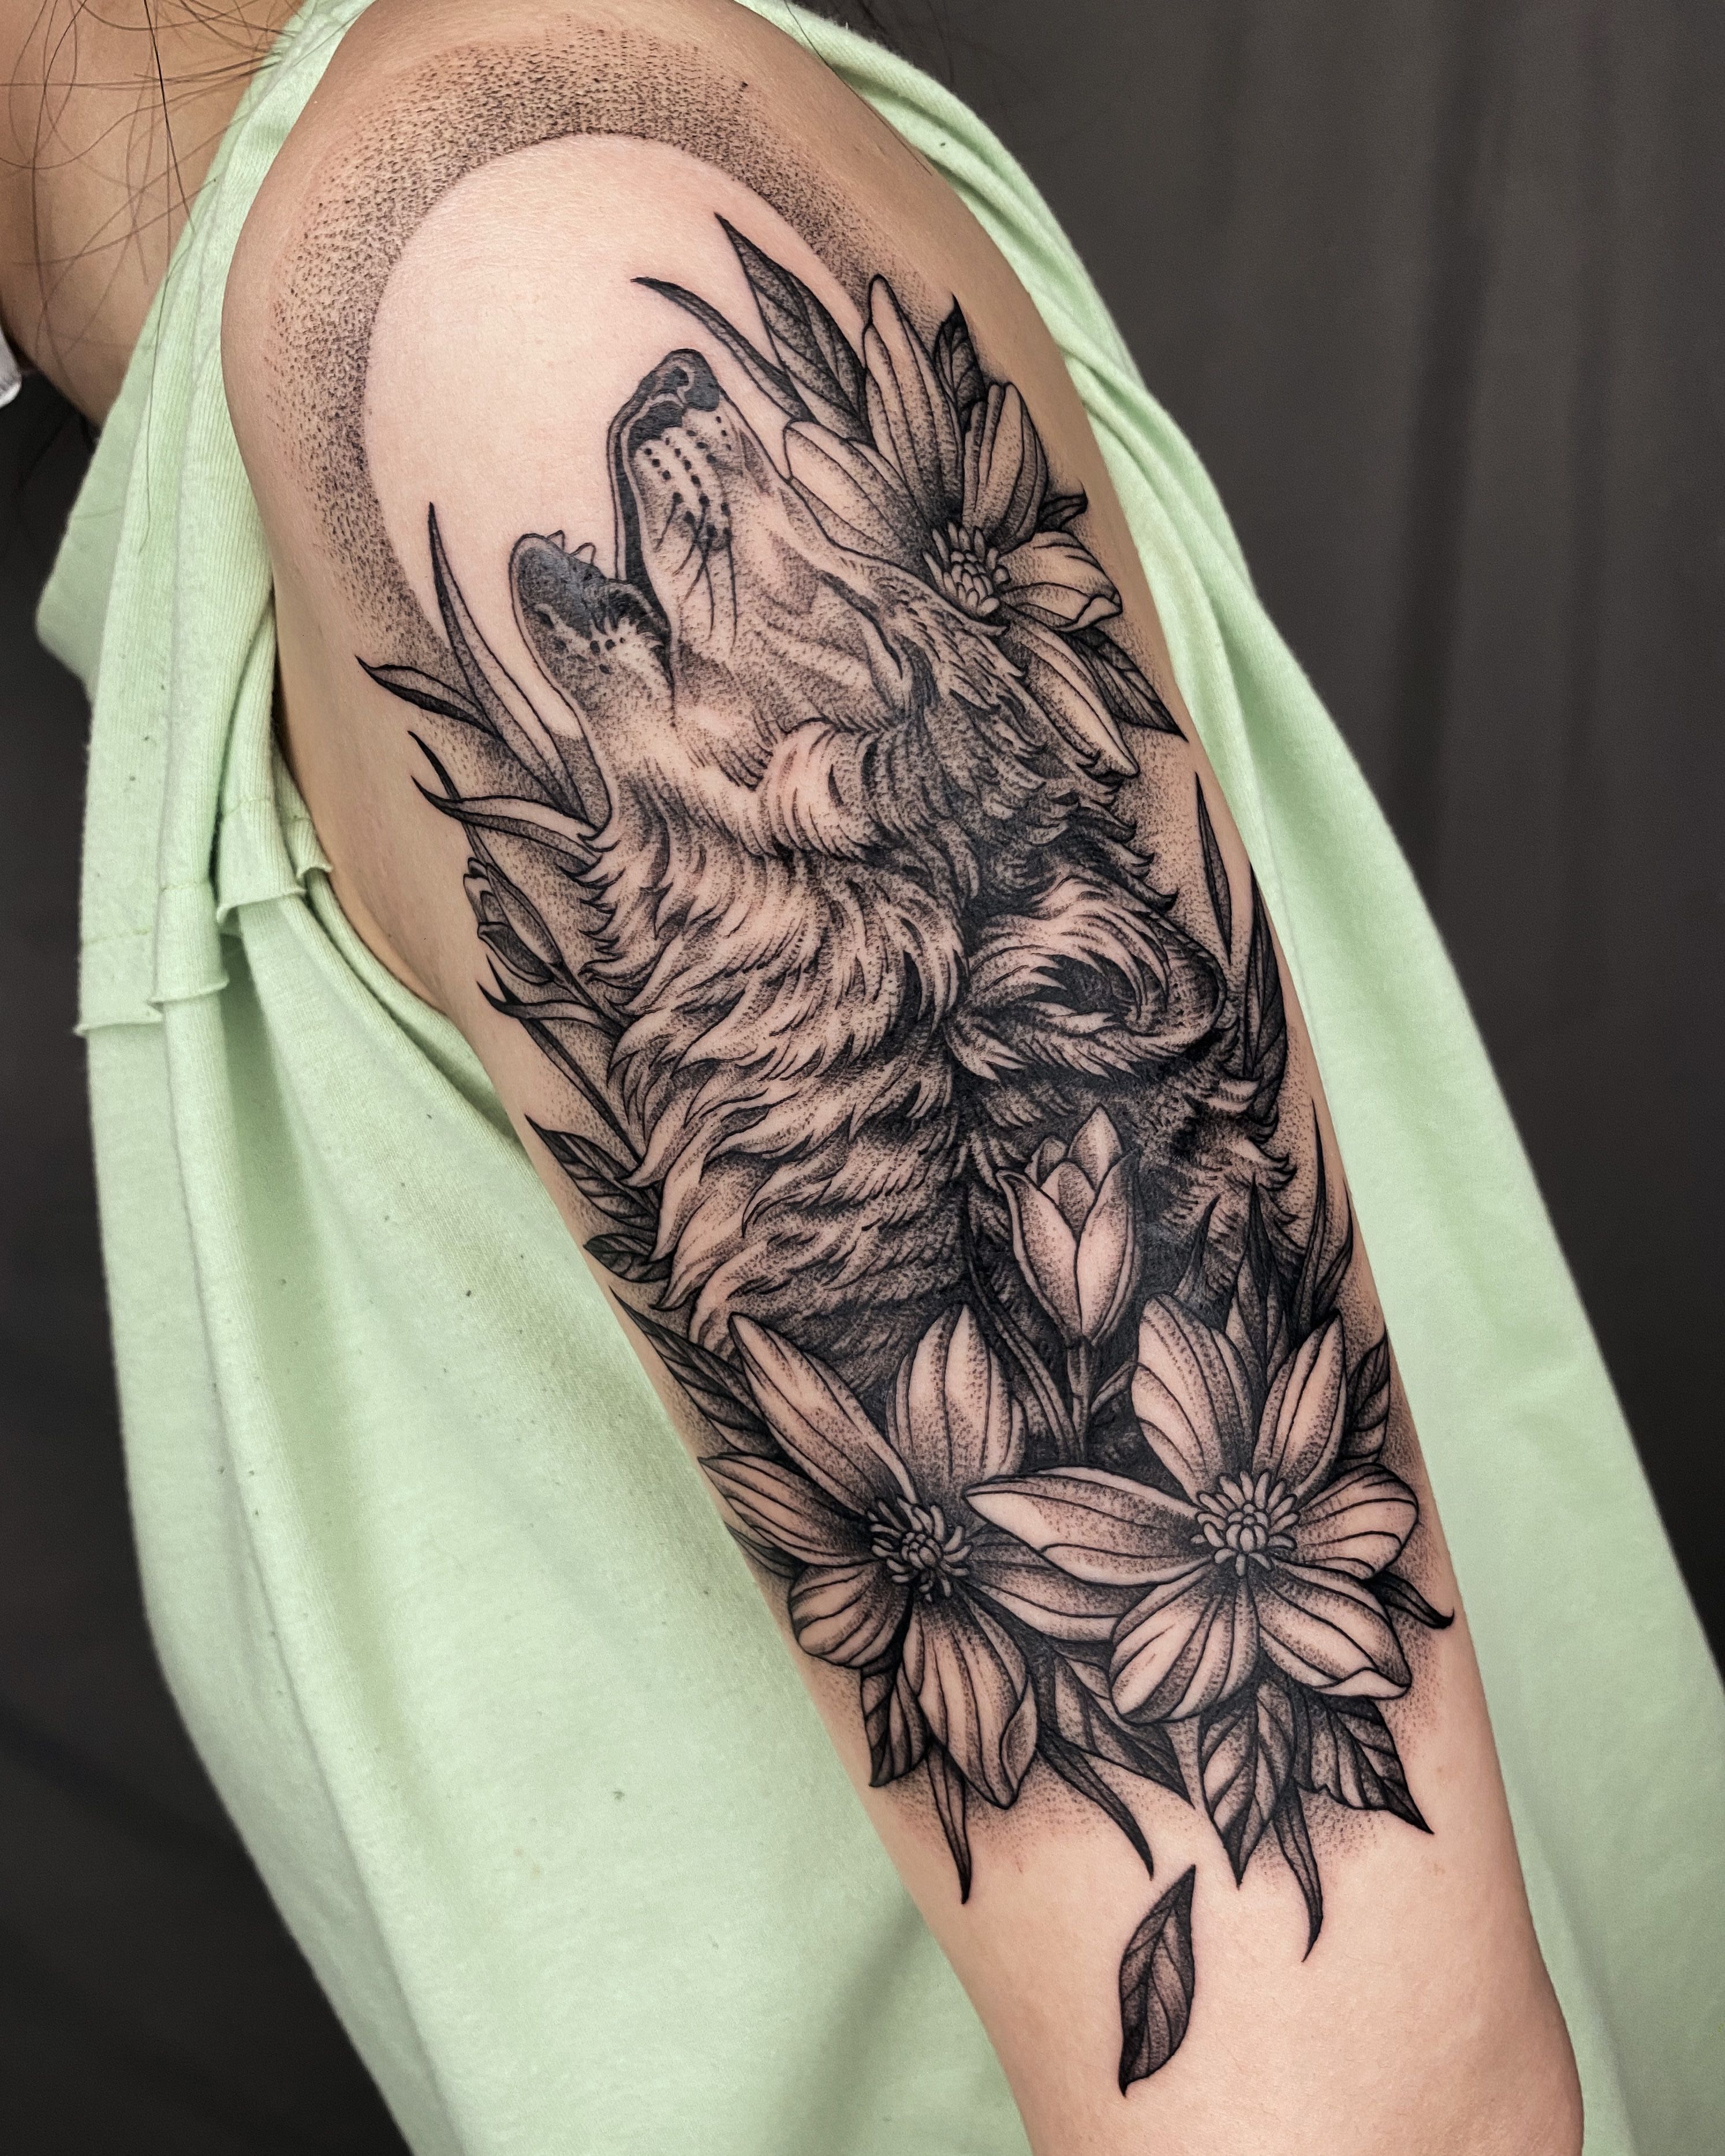 Aggregate more than 78 wolf flowers tattoo best  thtantai2